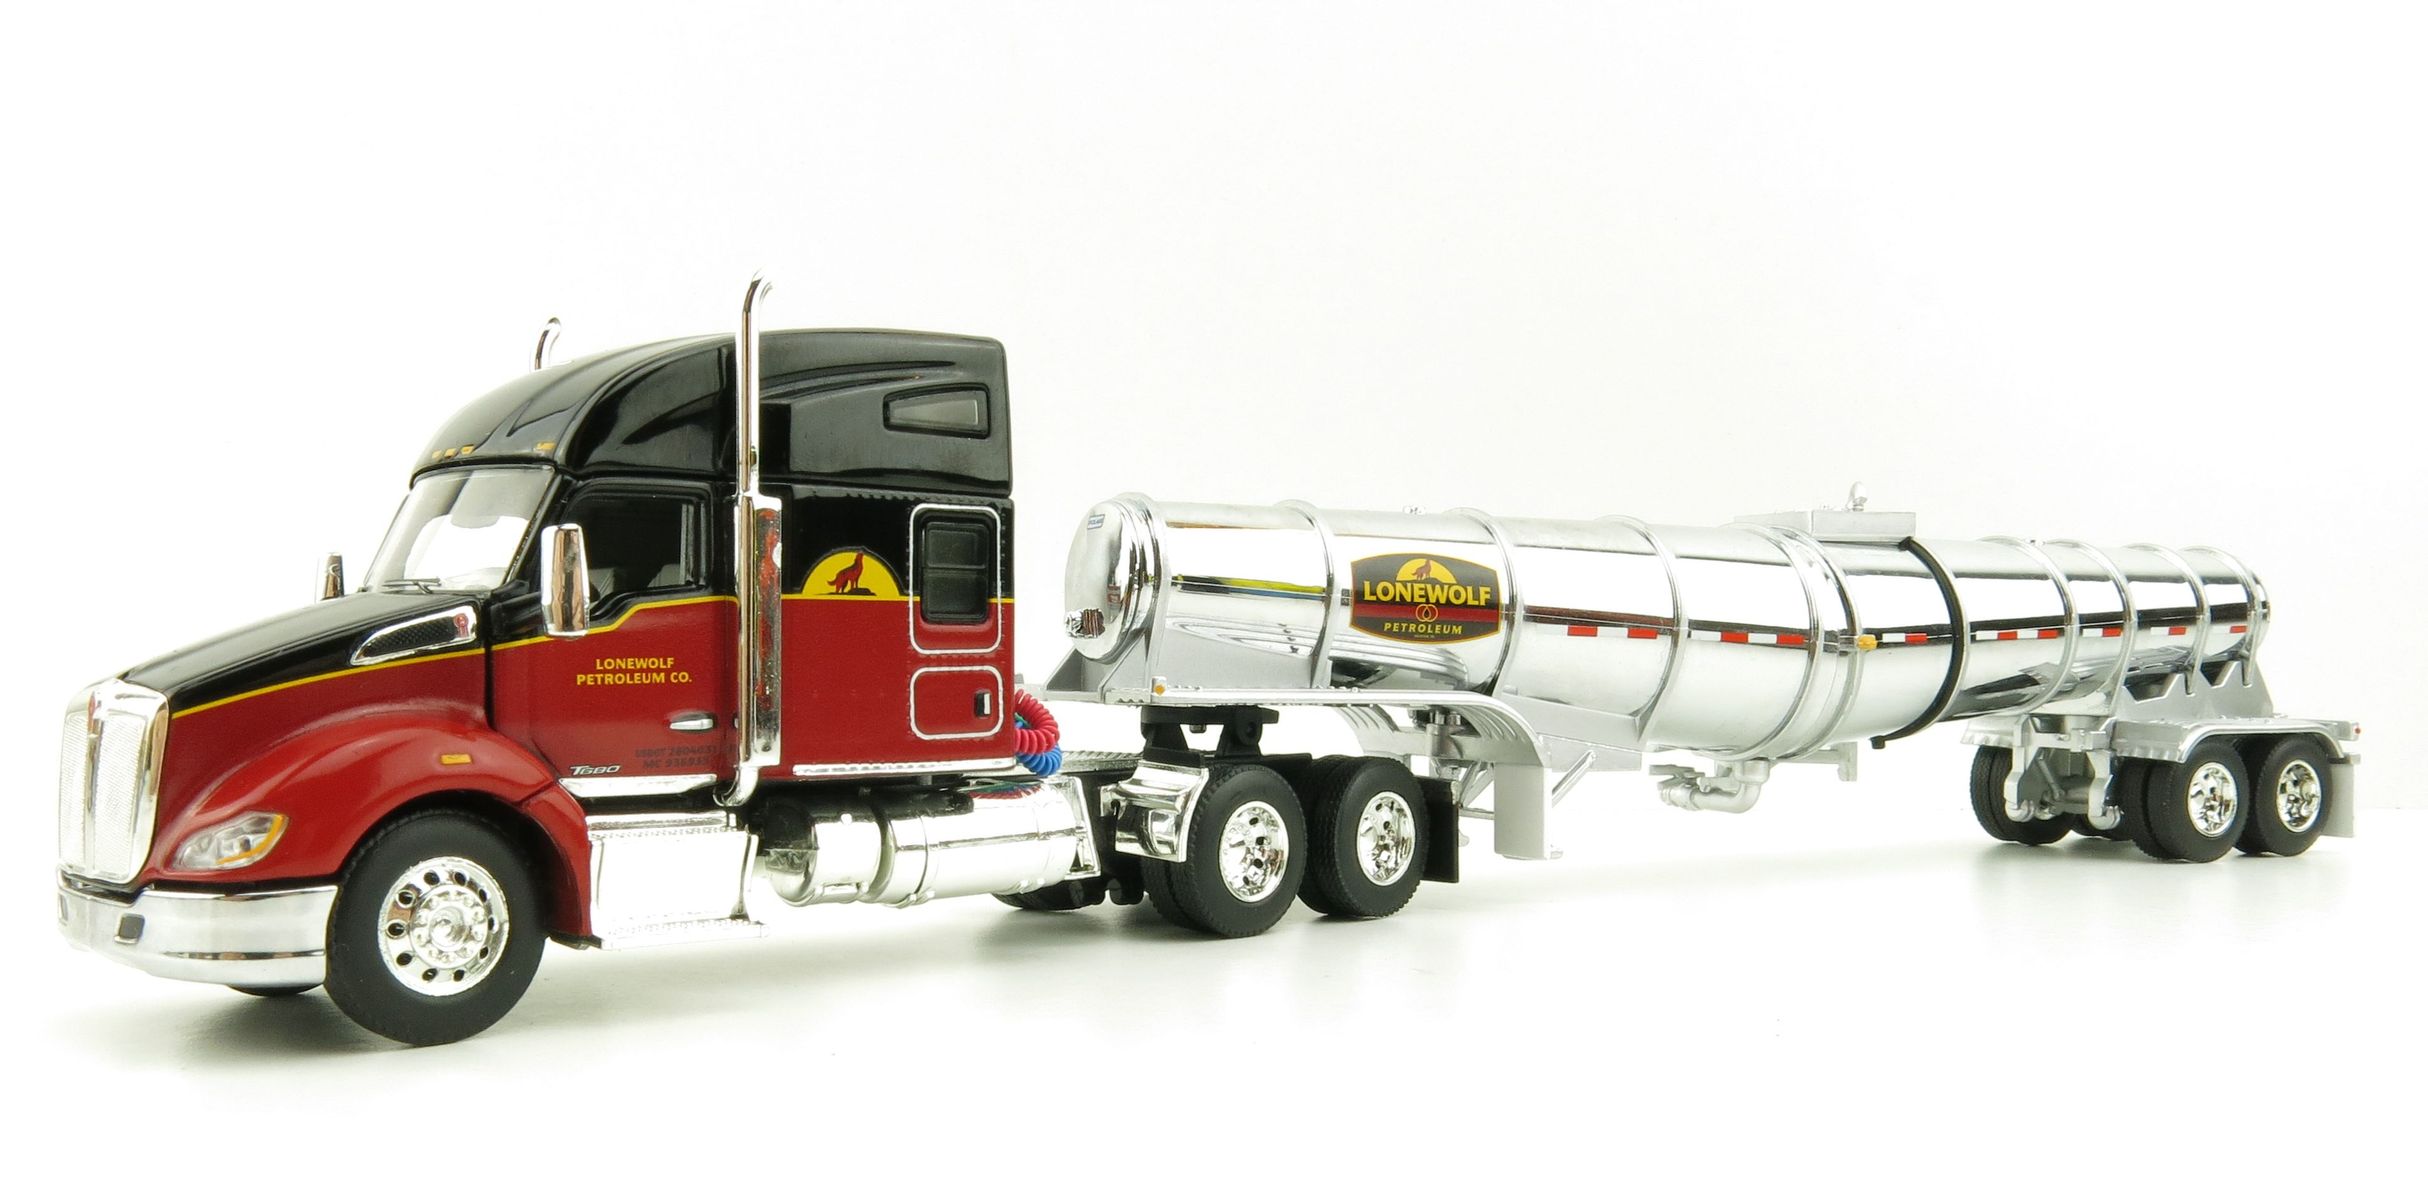 Product Image - First Gear 60-1041 Kenworth T680 Prime Mover with Polar Tank Trailer - Lonewolf Petroleum - Scale 1:64